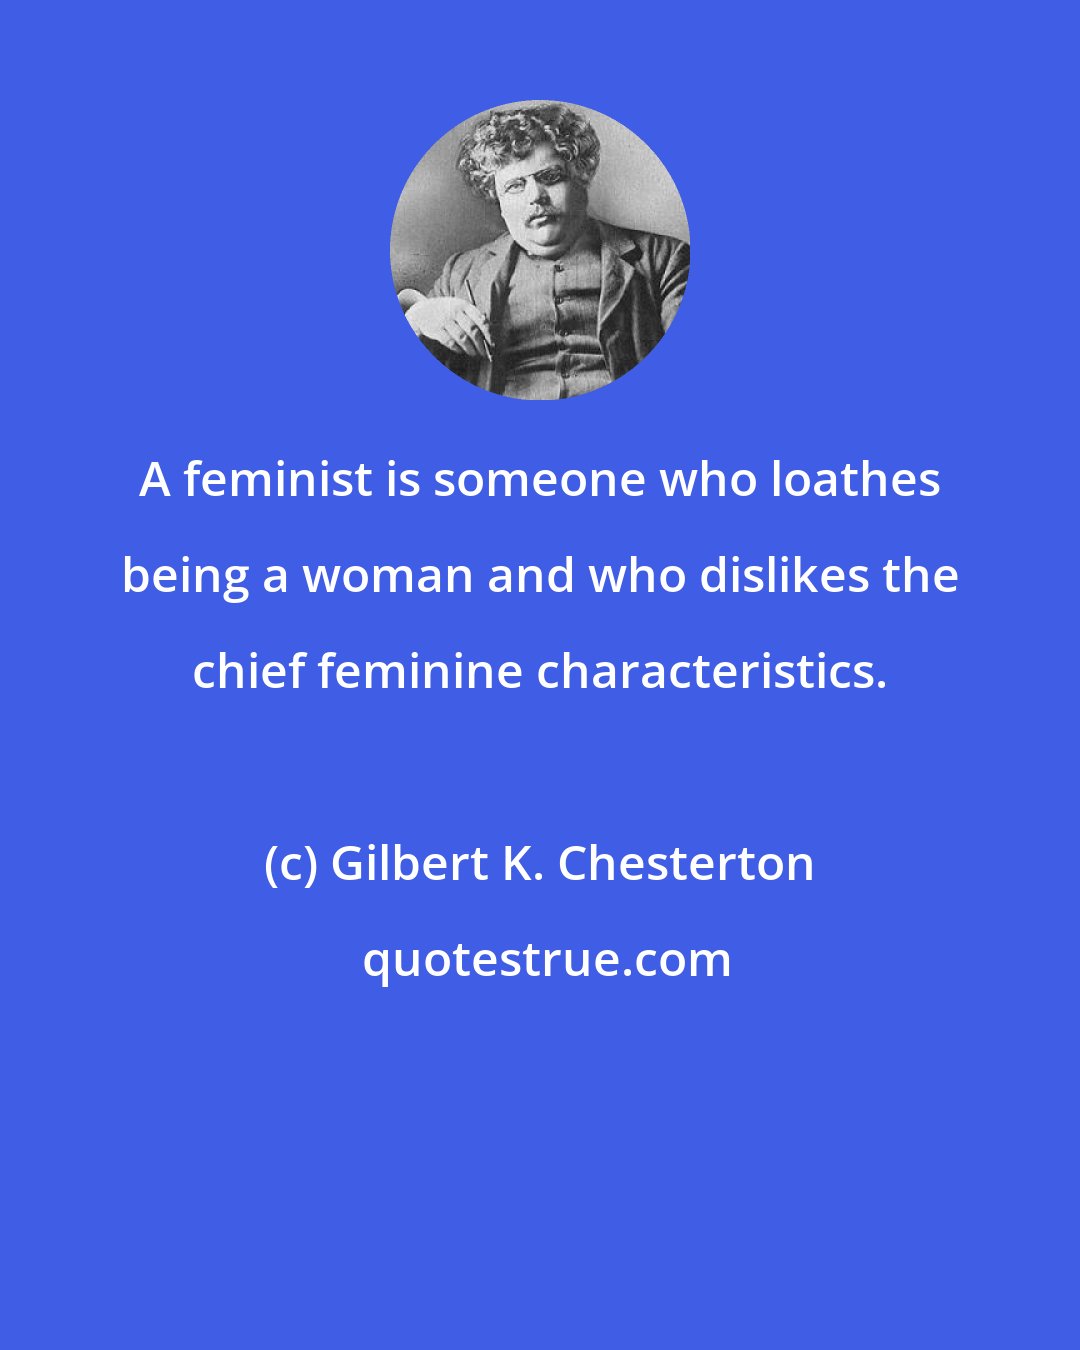 Gilbert K. Chesterton: A feminist is someone who loathes being a woman and who dislikes the chief feminine characteristics.